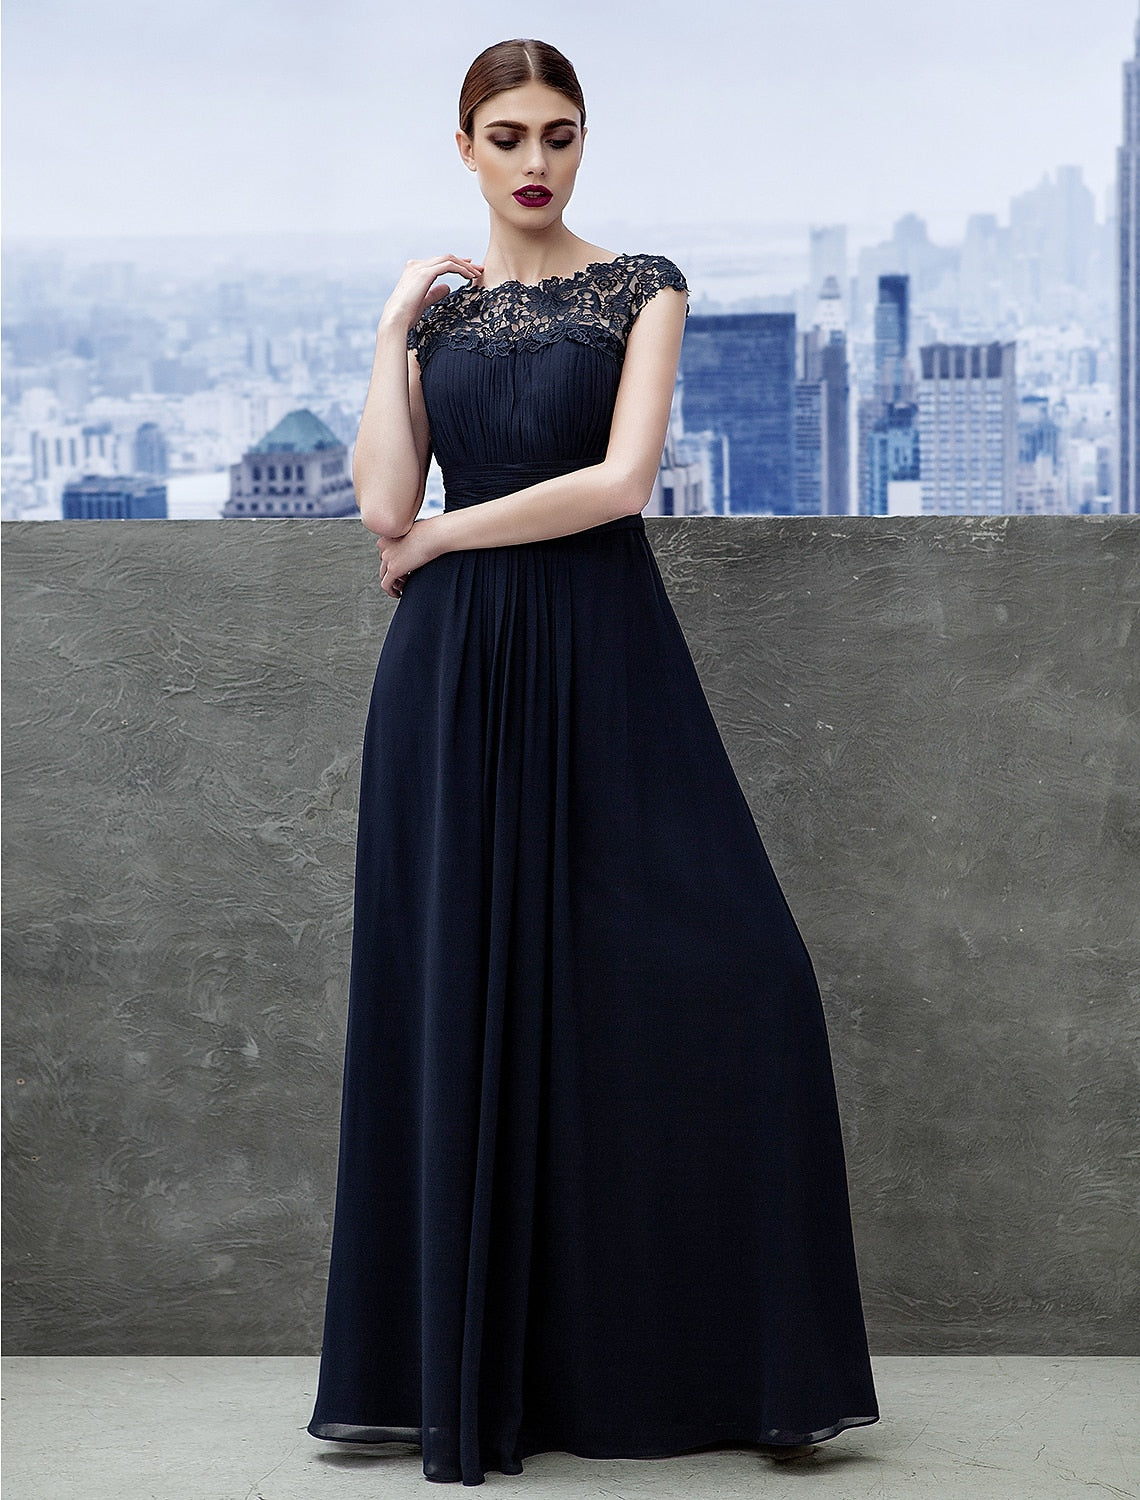 A-Line Evening Gown Empire Dress Wedding Guest Floor Length Short Sleeve Boat Neck Chiffon with Ruched Lace Insert